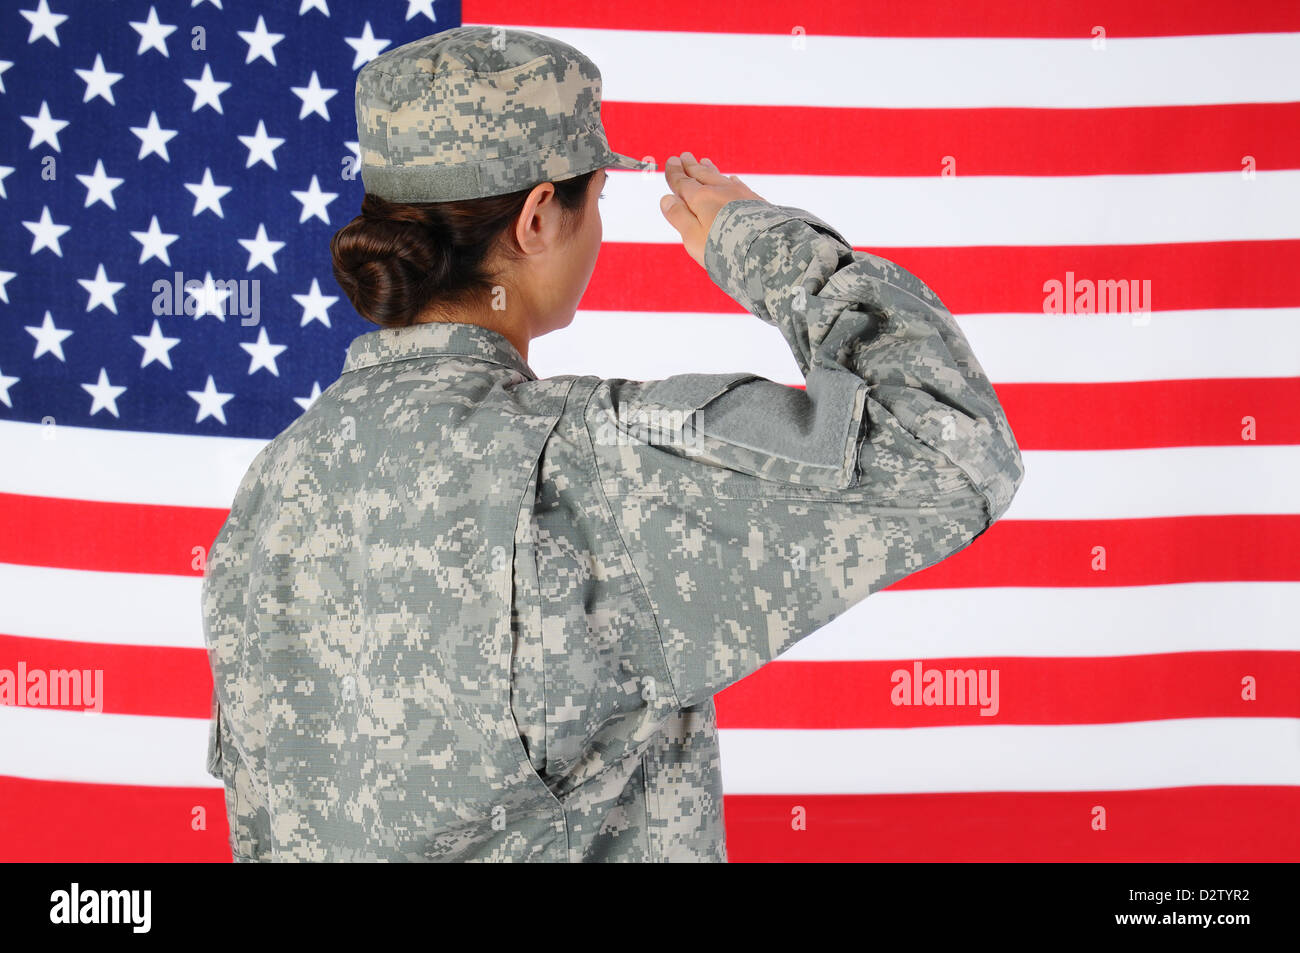 Closeup of an American Female Soldier in combat uniform saluting a flag. Stock Photo